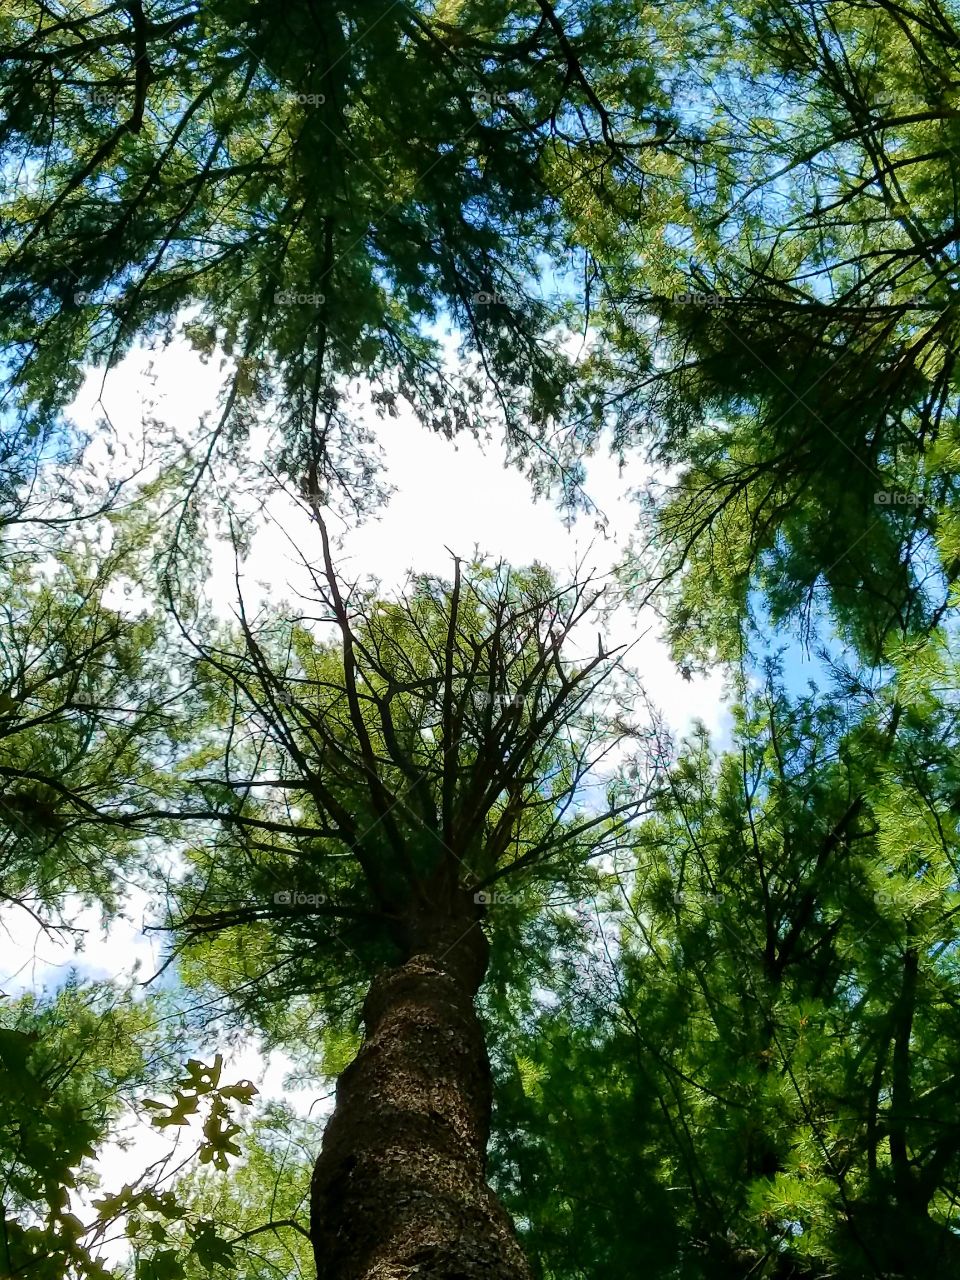 Looking up into Pine grove canopy.